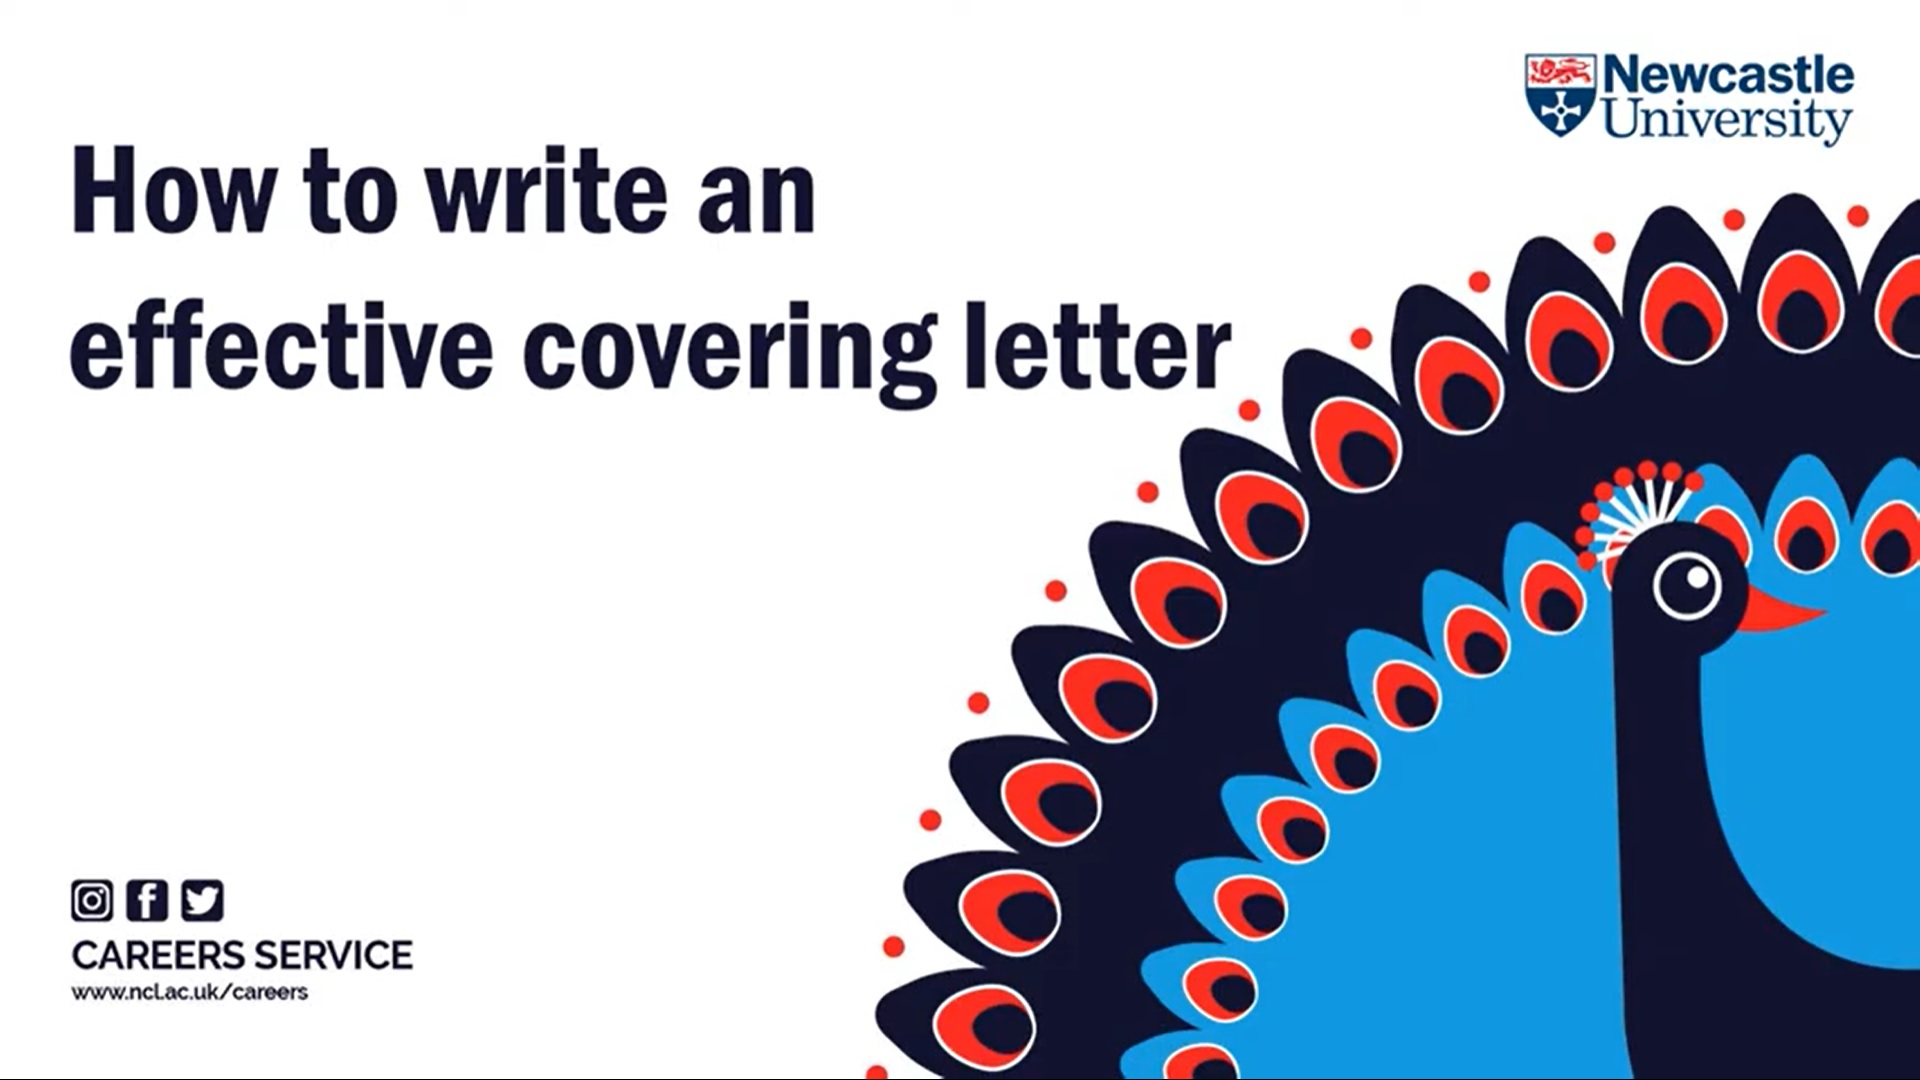 Title slide from our how to write an effective covering letter presentation